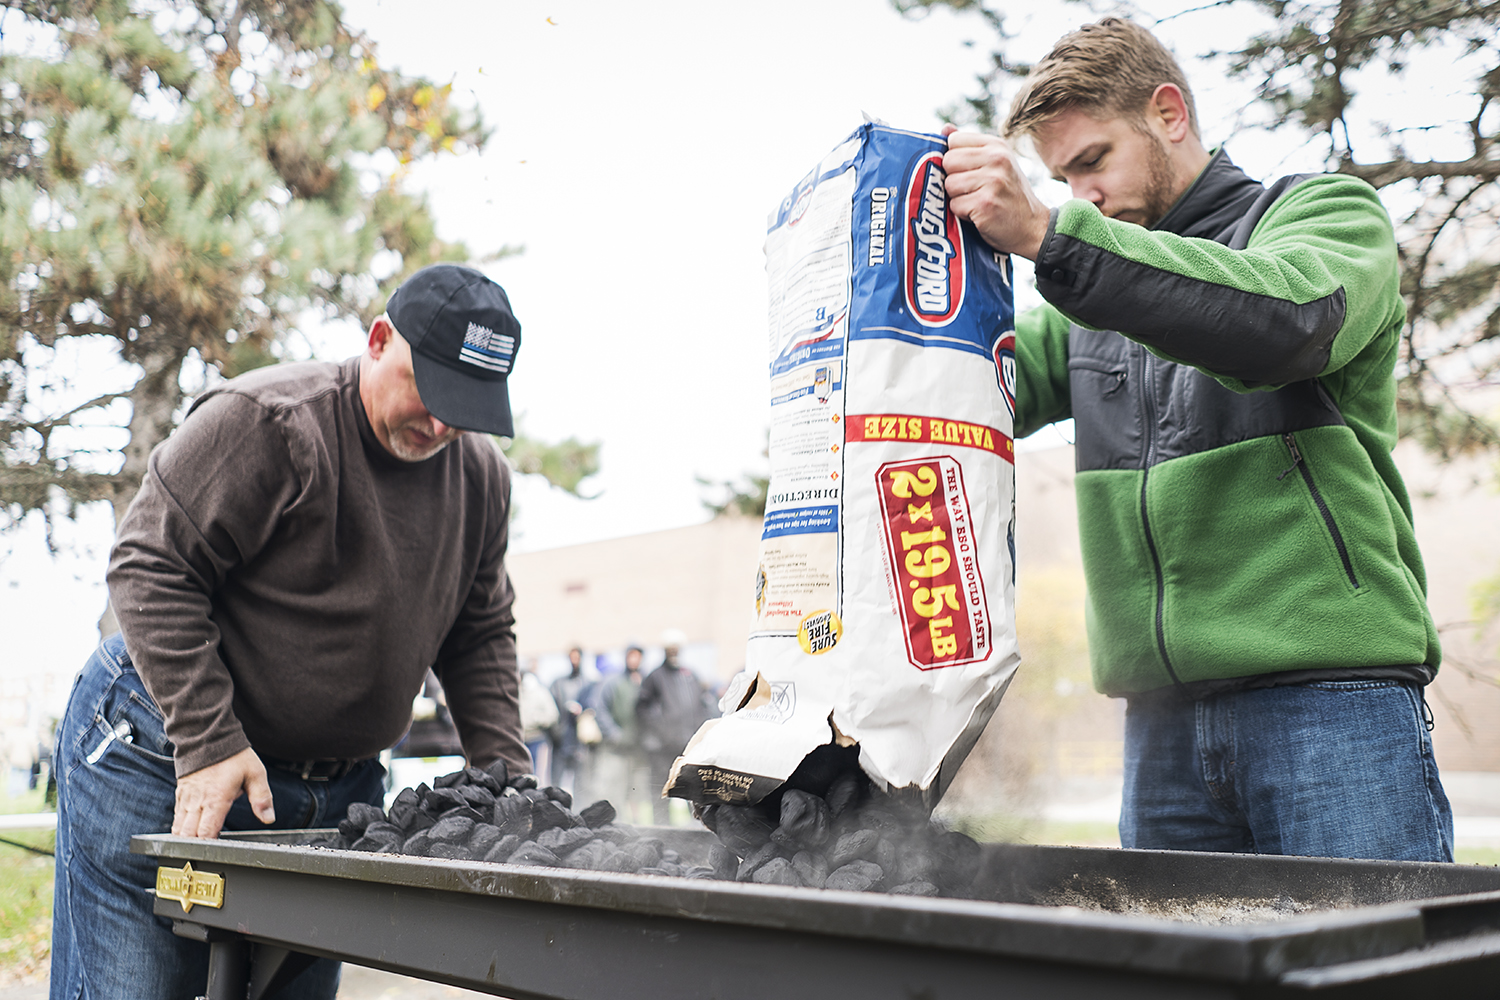 Volunteers Steven Moore, 52 (left) of Davison, and Steven Elkins, 27, of Flint, prepare the grill at Riverbank Park for the Flint Community Cookout. They generally grill 300 burgers and more than 100 hot dogs at each cookout. 